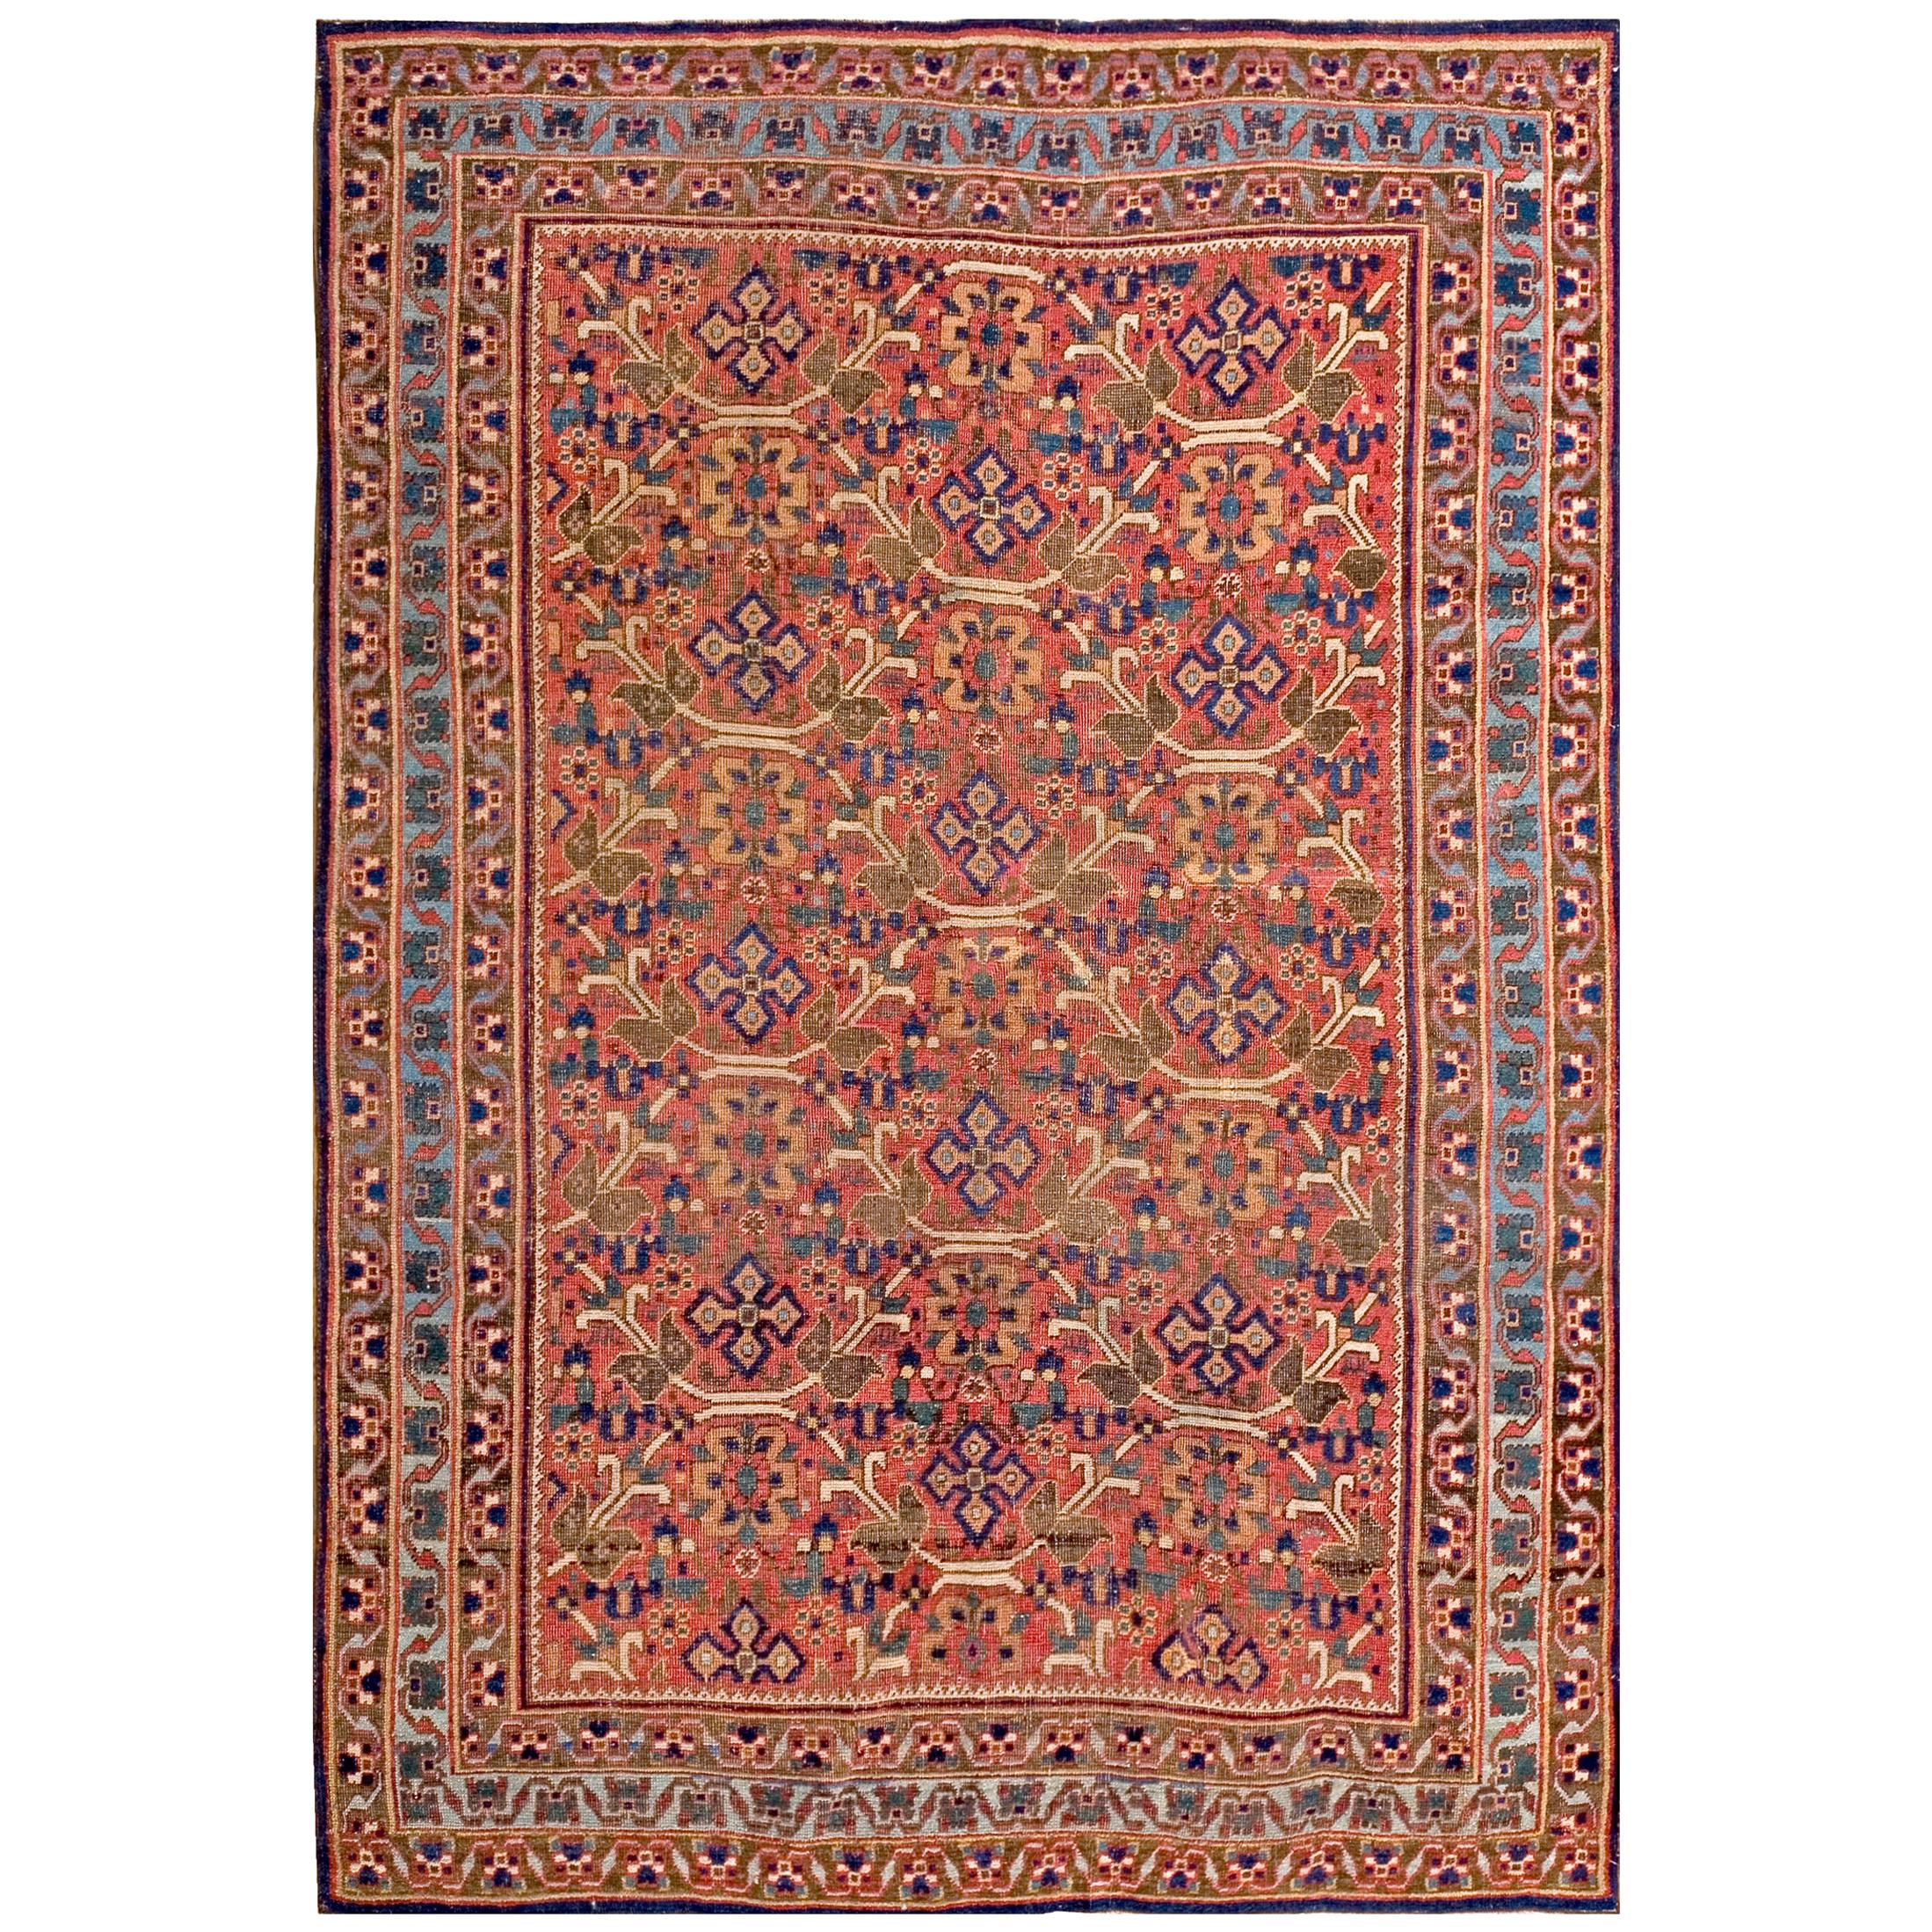 Early 20th Century S.W. Persian Afshar Carpet ( 4'2" x 6' - 127 x 183 ) For Sale